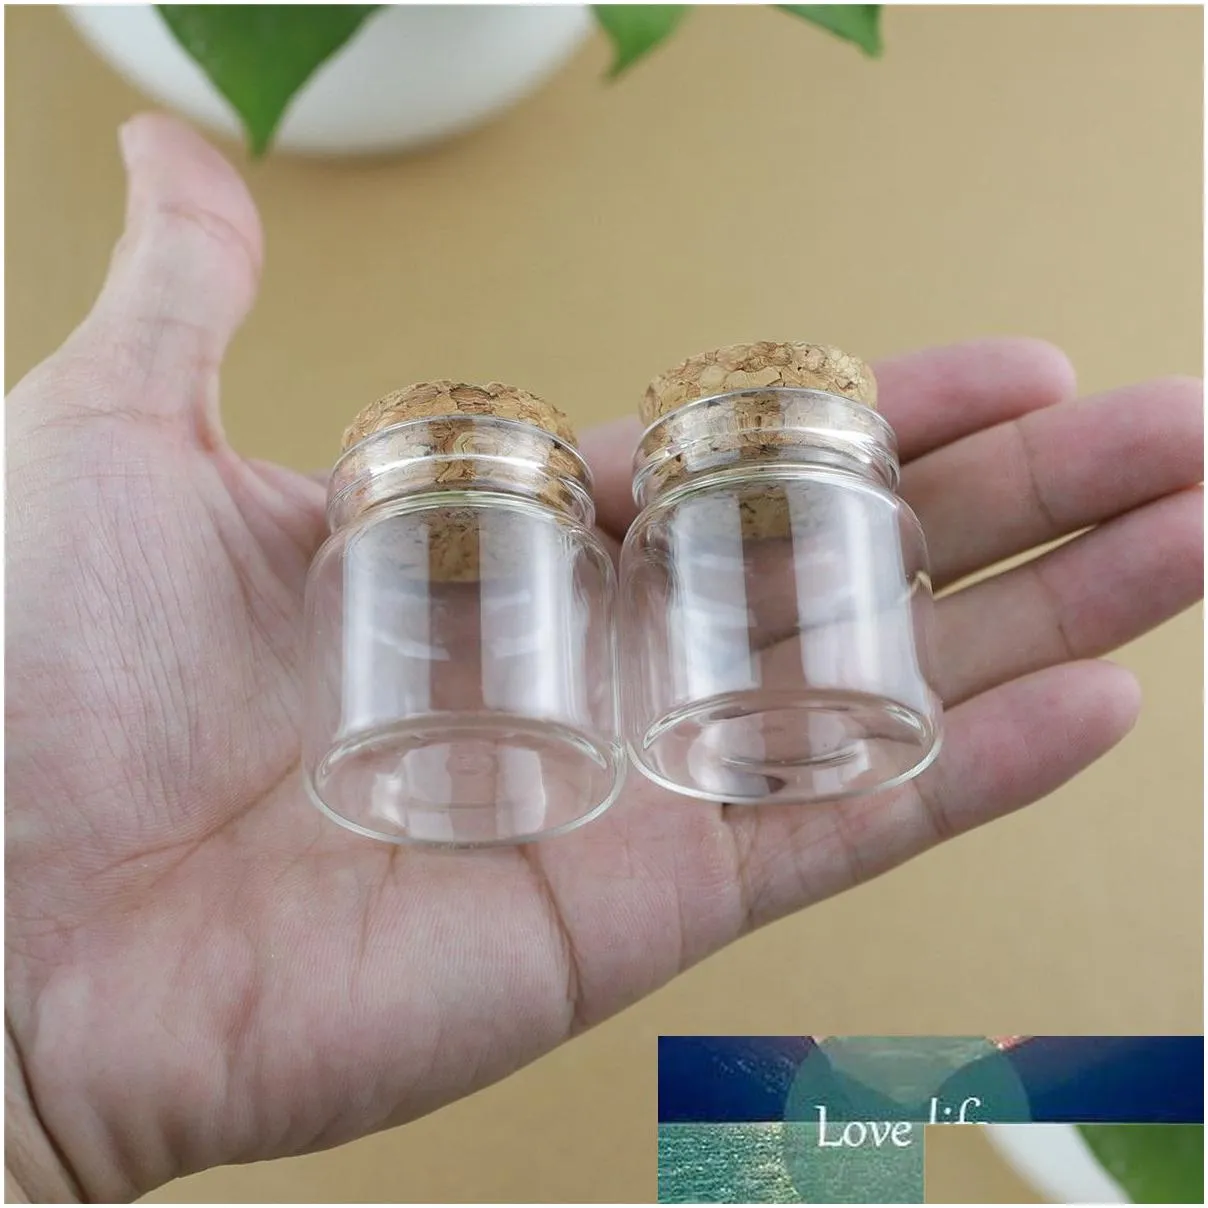 Packing Bottles Wholesale 24Pcs/Lot 37X40Mm 25Ml Mini Glass Spice Storage Jars Corks Spicy Bottle Containers Tiny Vials With Cork Stop Dhrf9